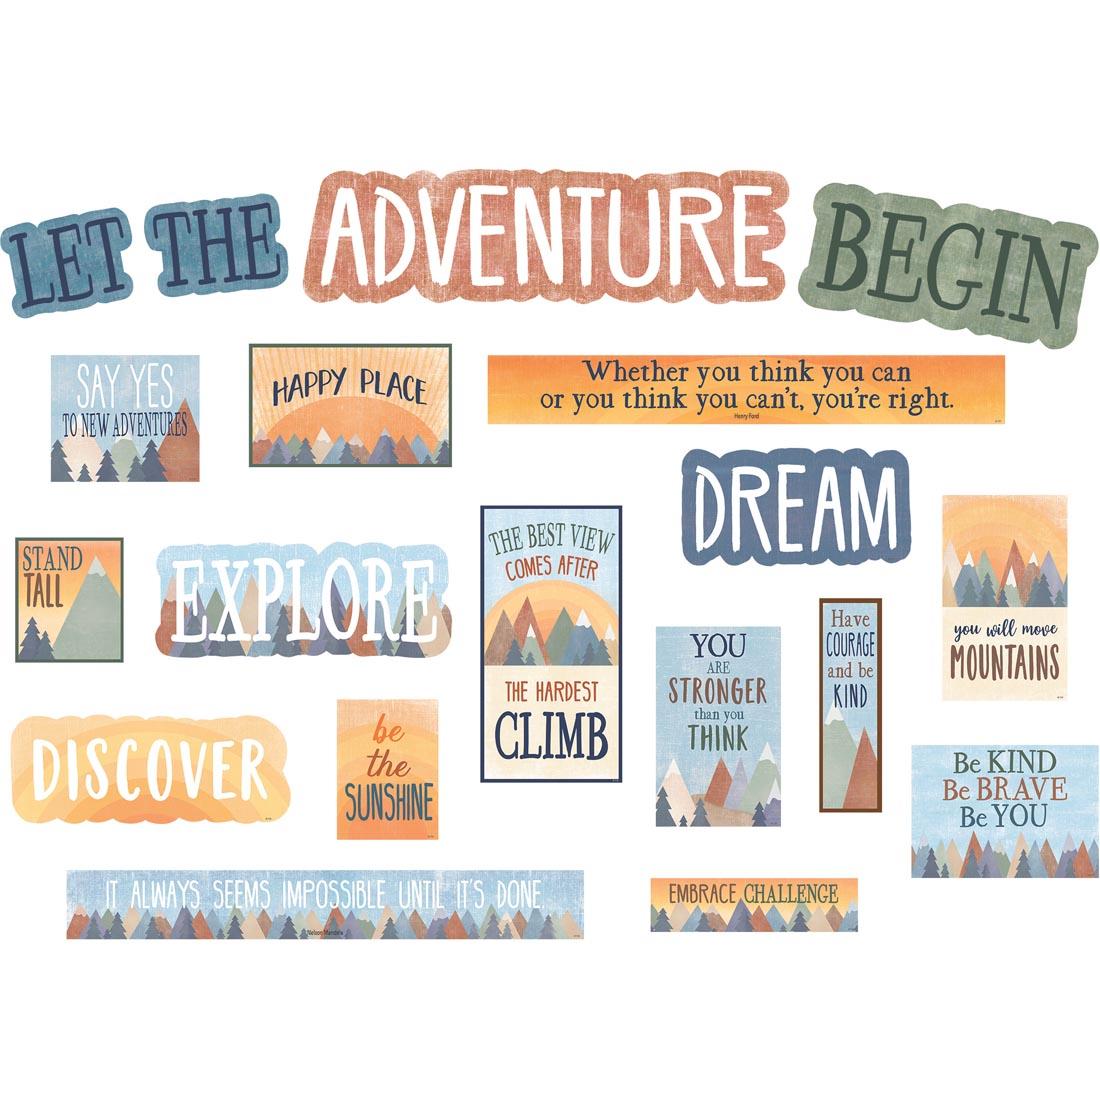 Let the Adventure Begin Mini Bulletin Board Set from the Moving Mountains collection by Teacher Created Resources